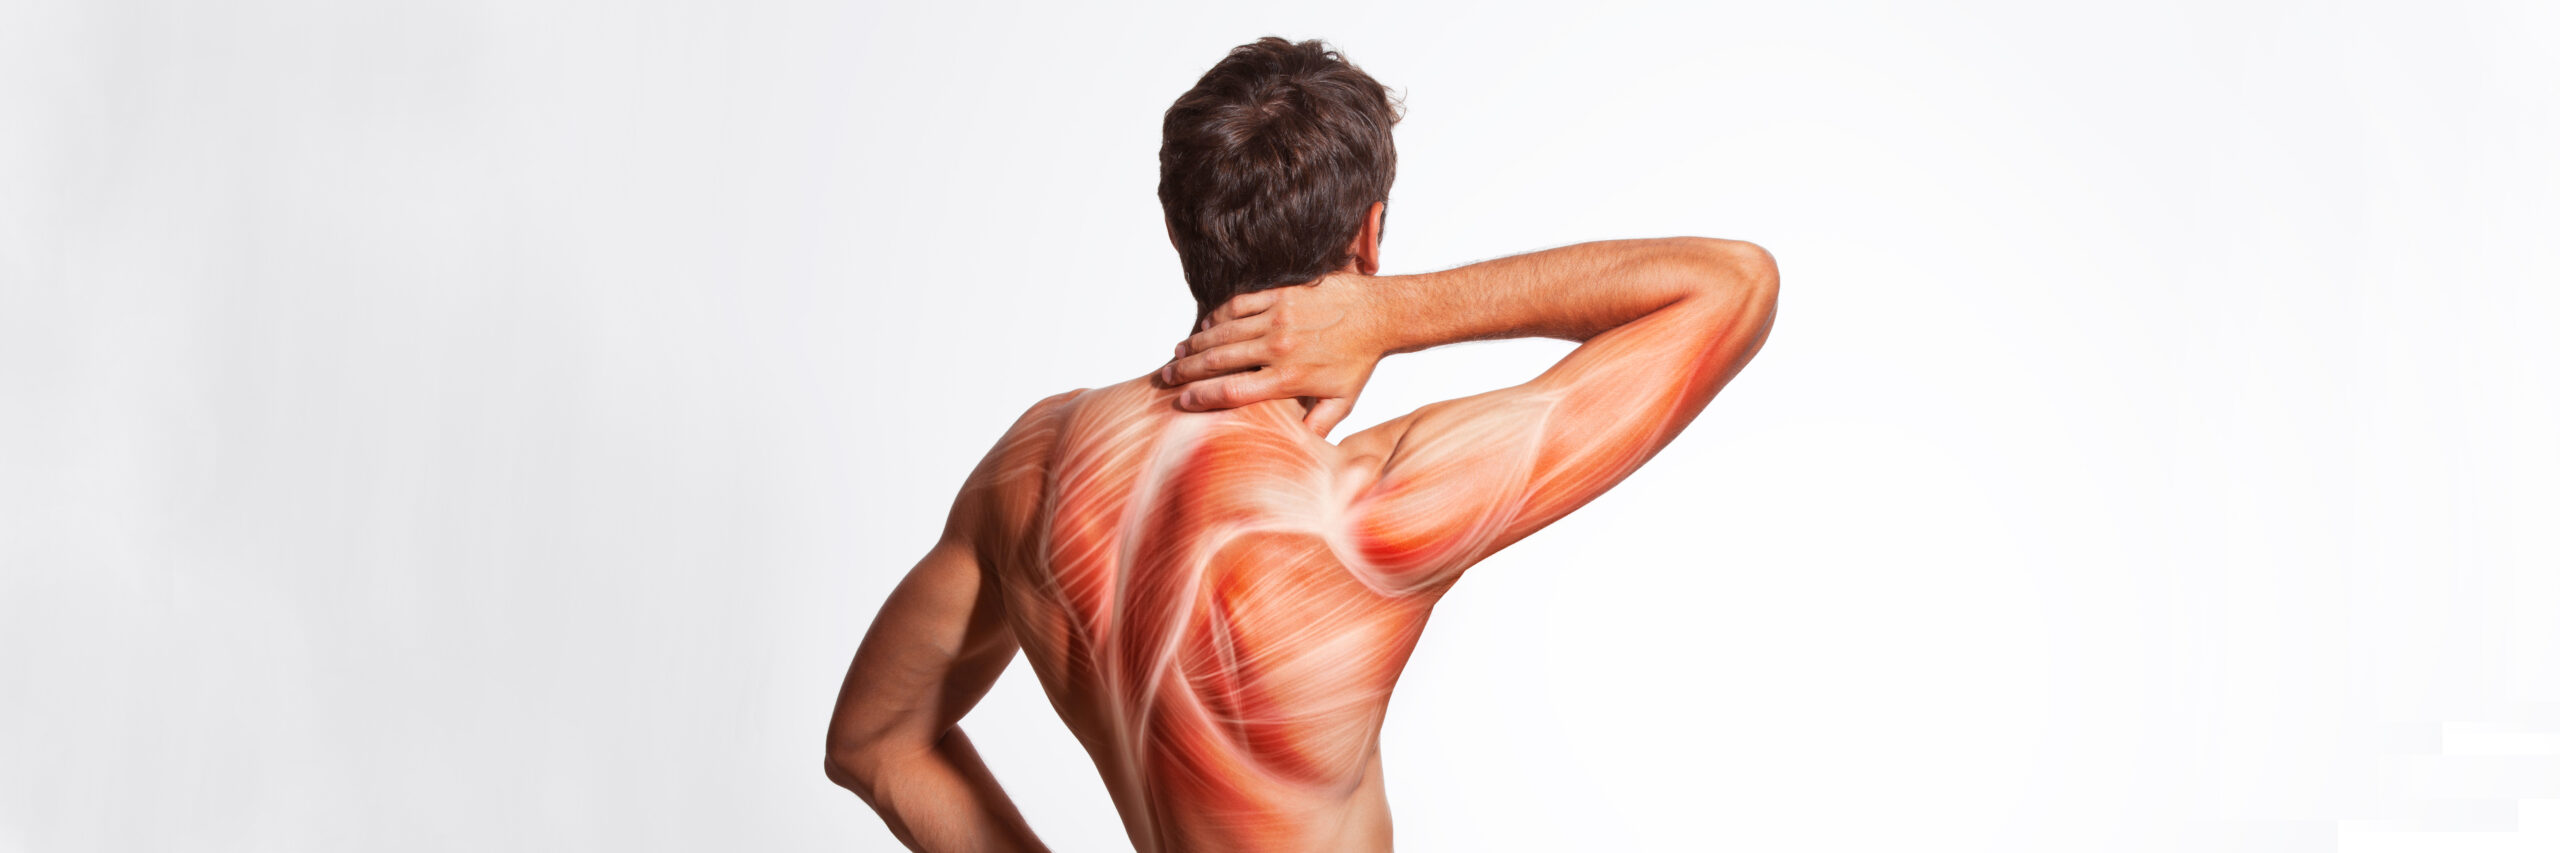 Man's back muscle and body structure. Human body view from behind isolated on white background.